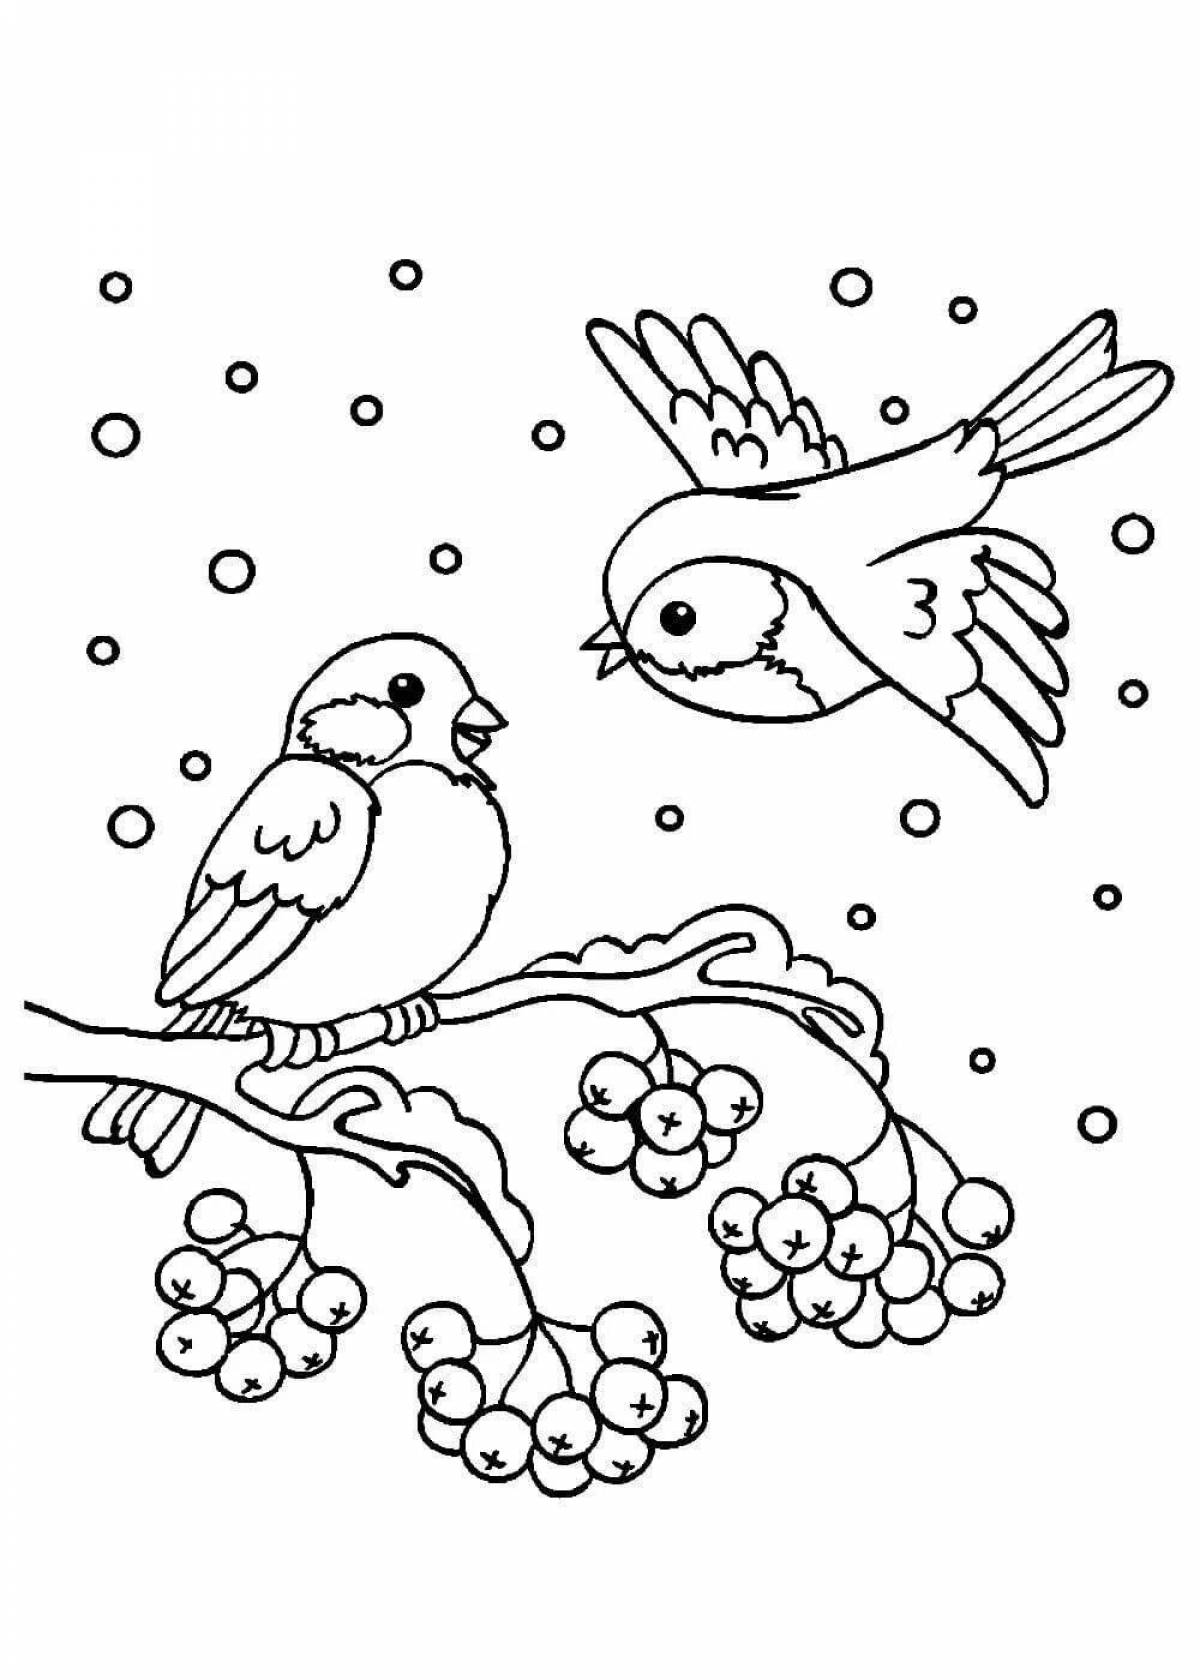 Soaring coloring pages of a bird on a branch in winter